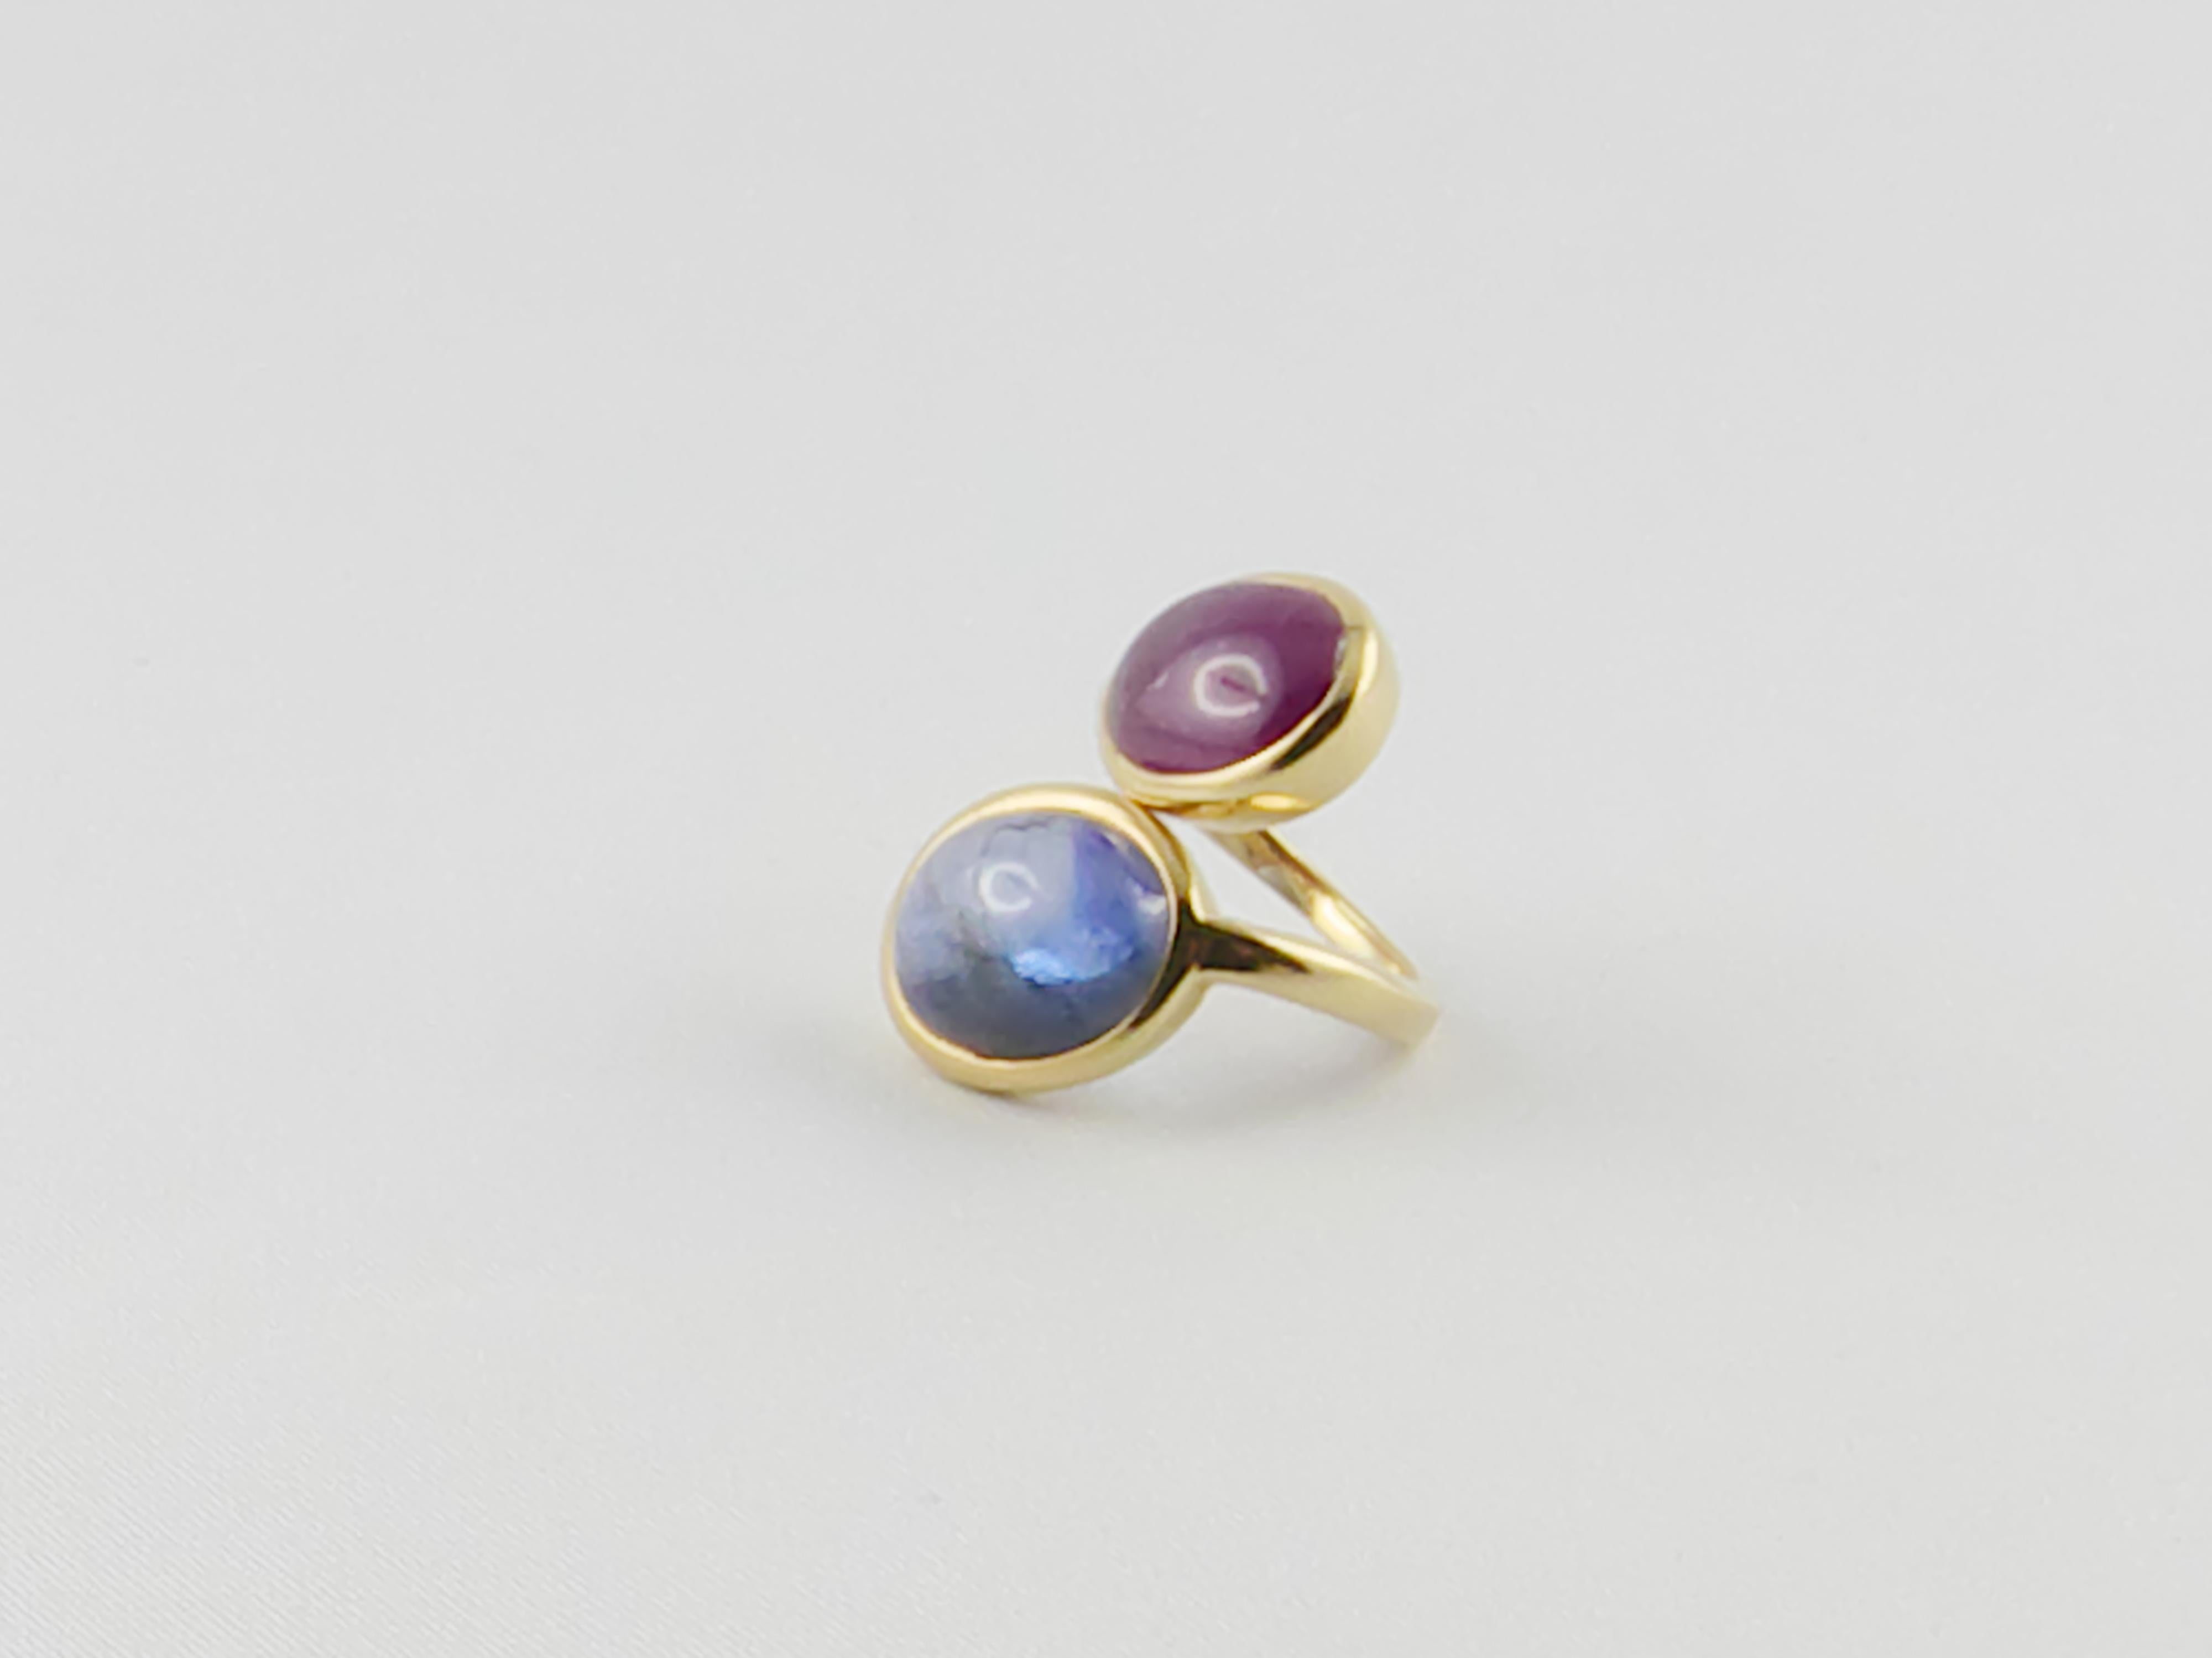 Old David Webb Ruby and Sapphire Cabochon  18 karat Gold  Ring
The two gorgeous gems, set in a tapering crossover shank, mounted in 18ct Yellow Gold give an extremely elegant, glamourous and sophisticated look.
This delightful  Crossover Ring can be